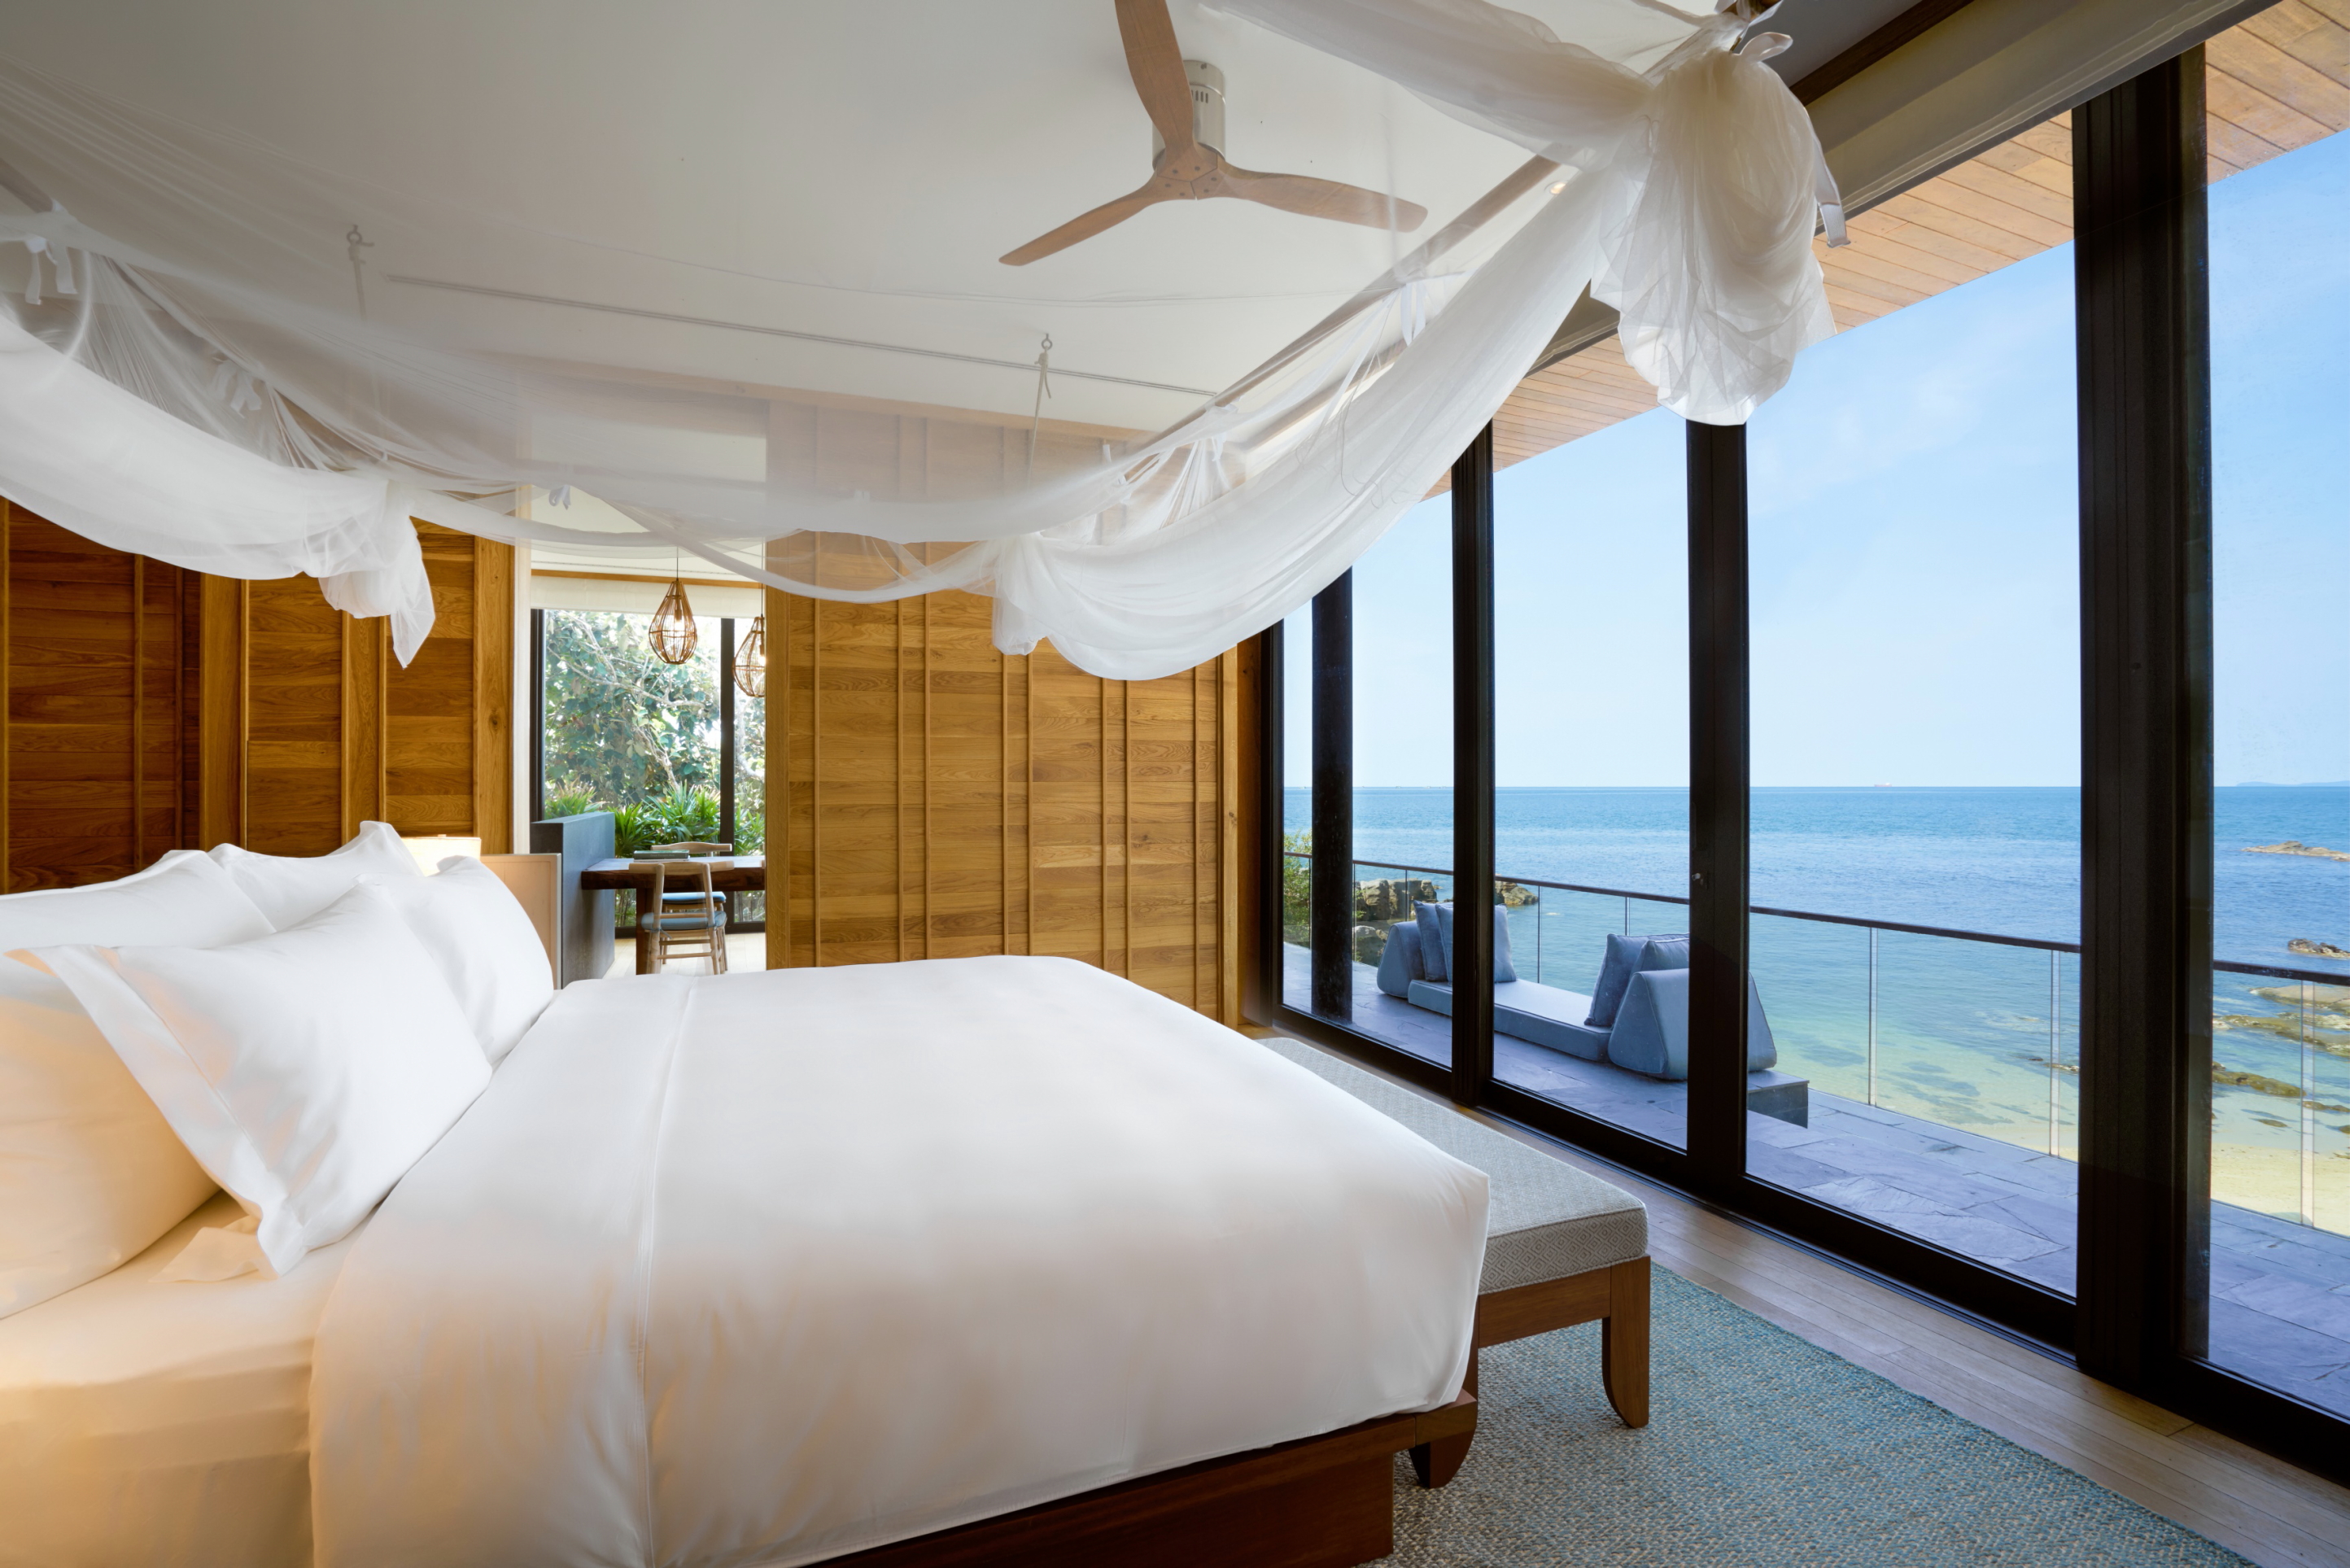 What dreams are made of.... Bedroom of a Beach Retreat at the Six Senses resort on Krabey Island in Cambodia. Click to enlarge.